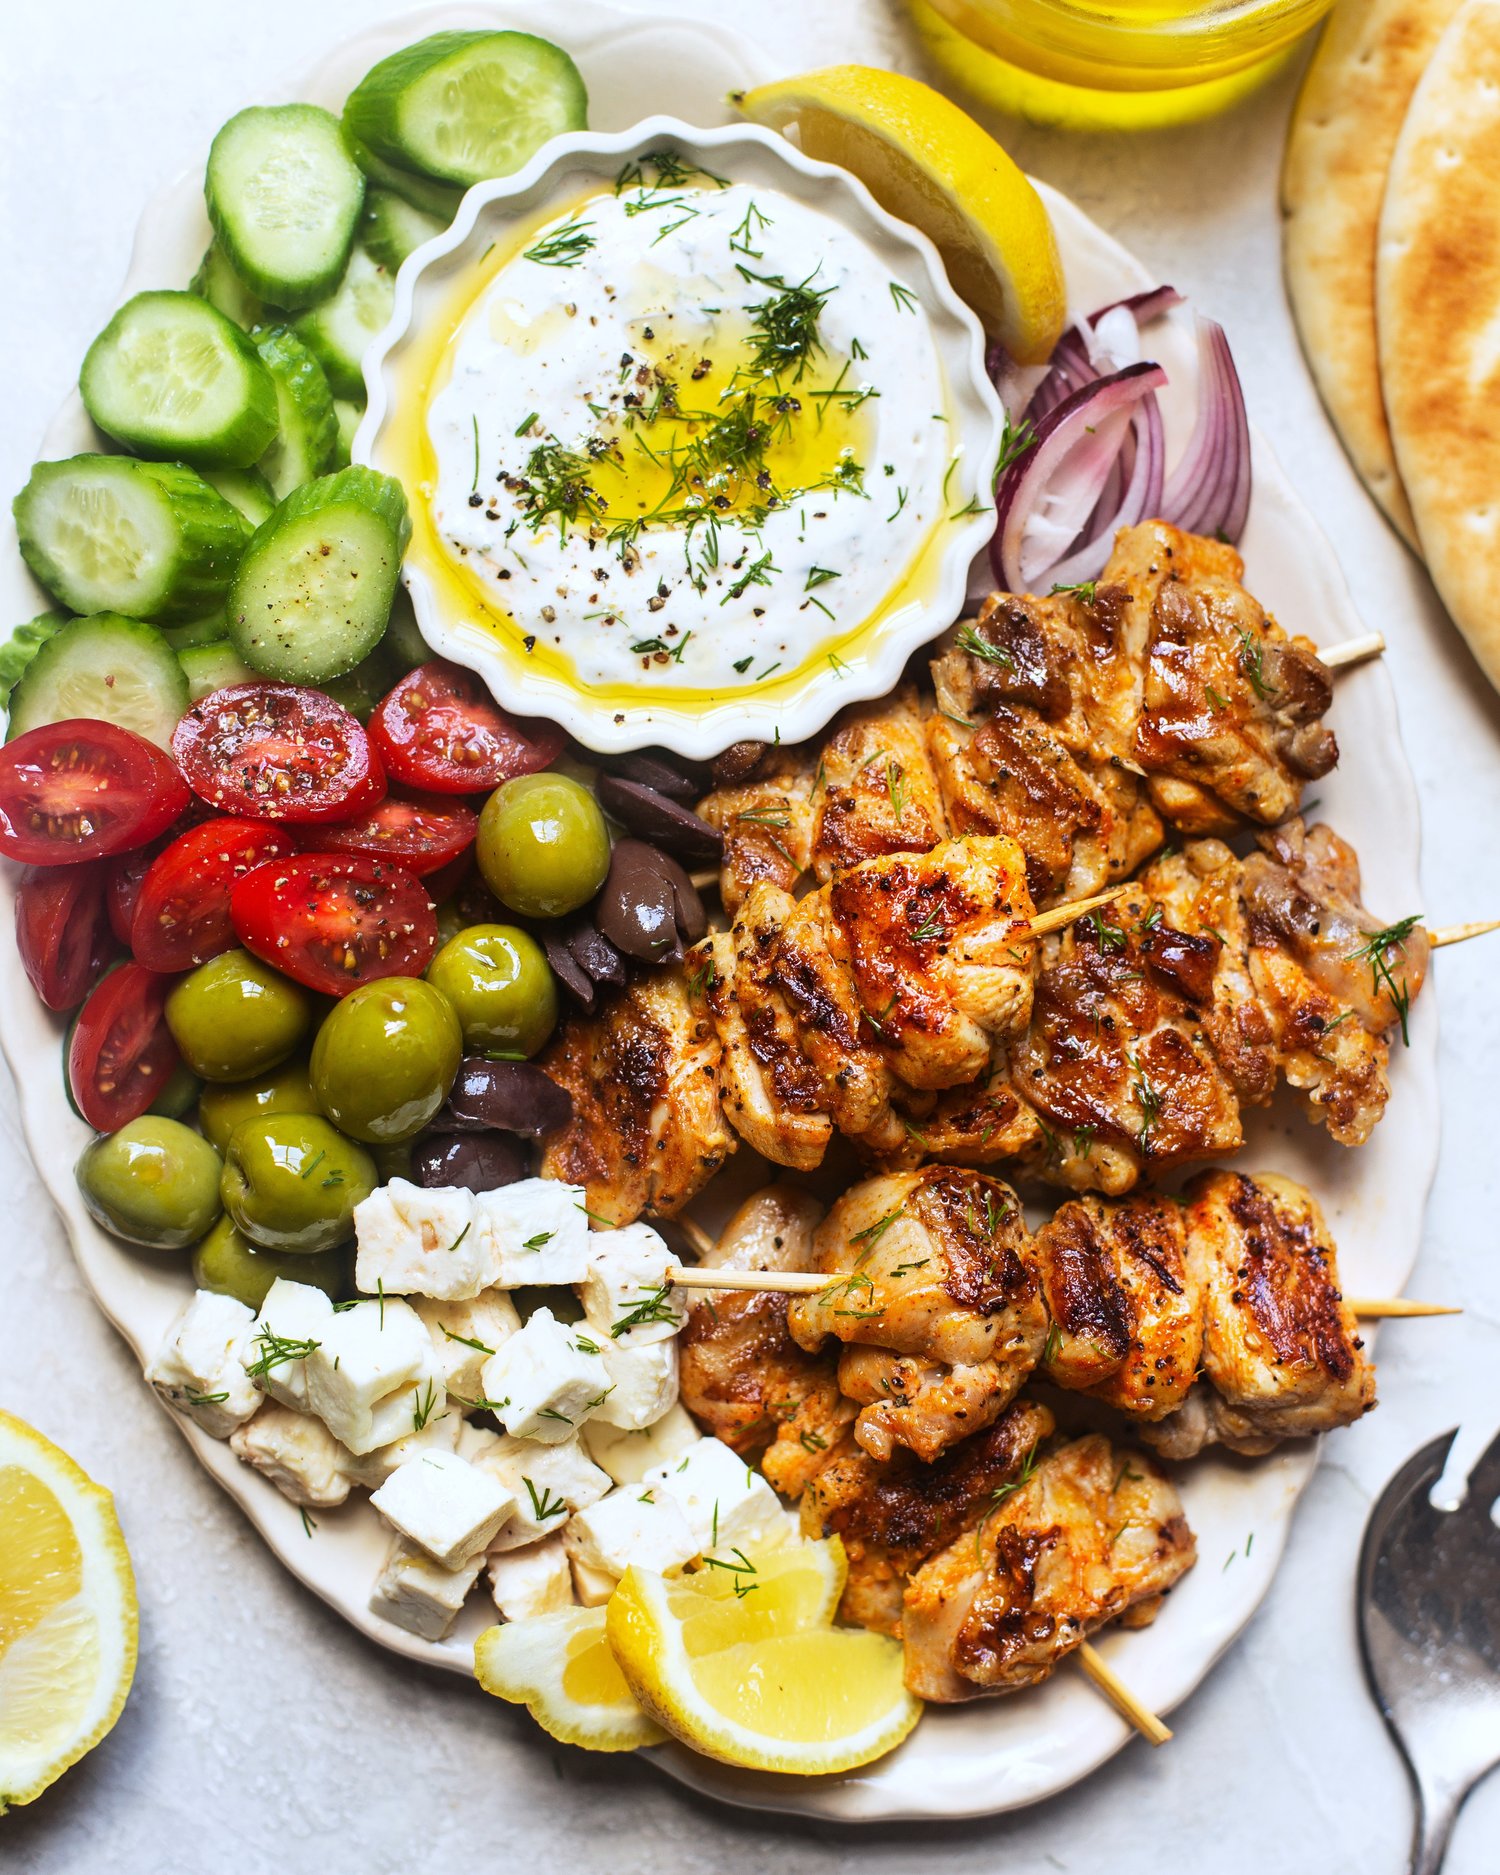 CHICKEN SKEWERS WITH CELERY AND PRESERVED LEMON SALAD